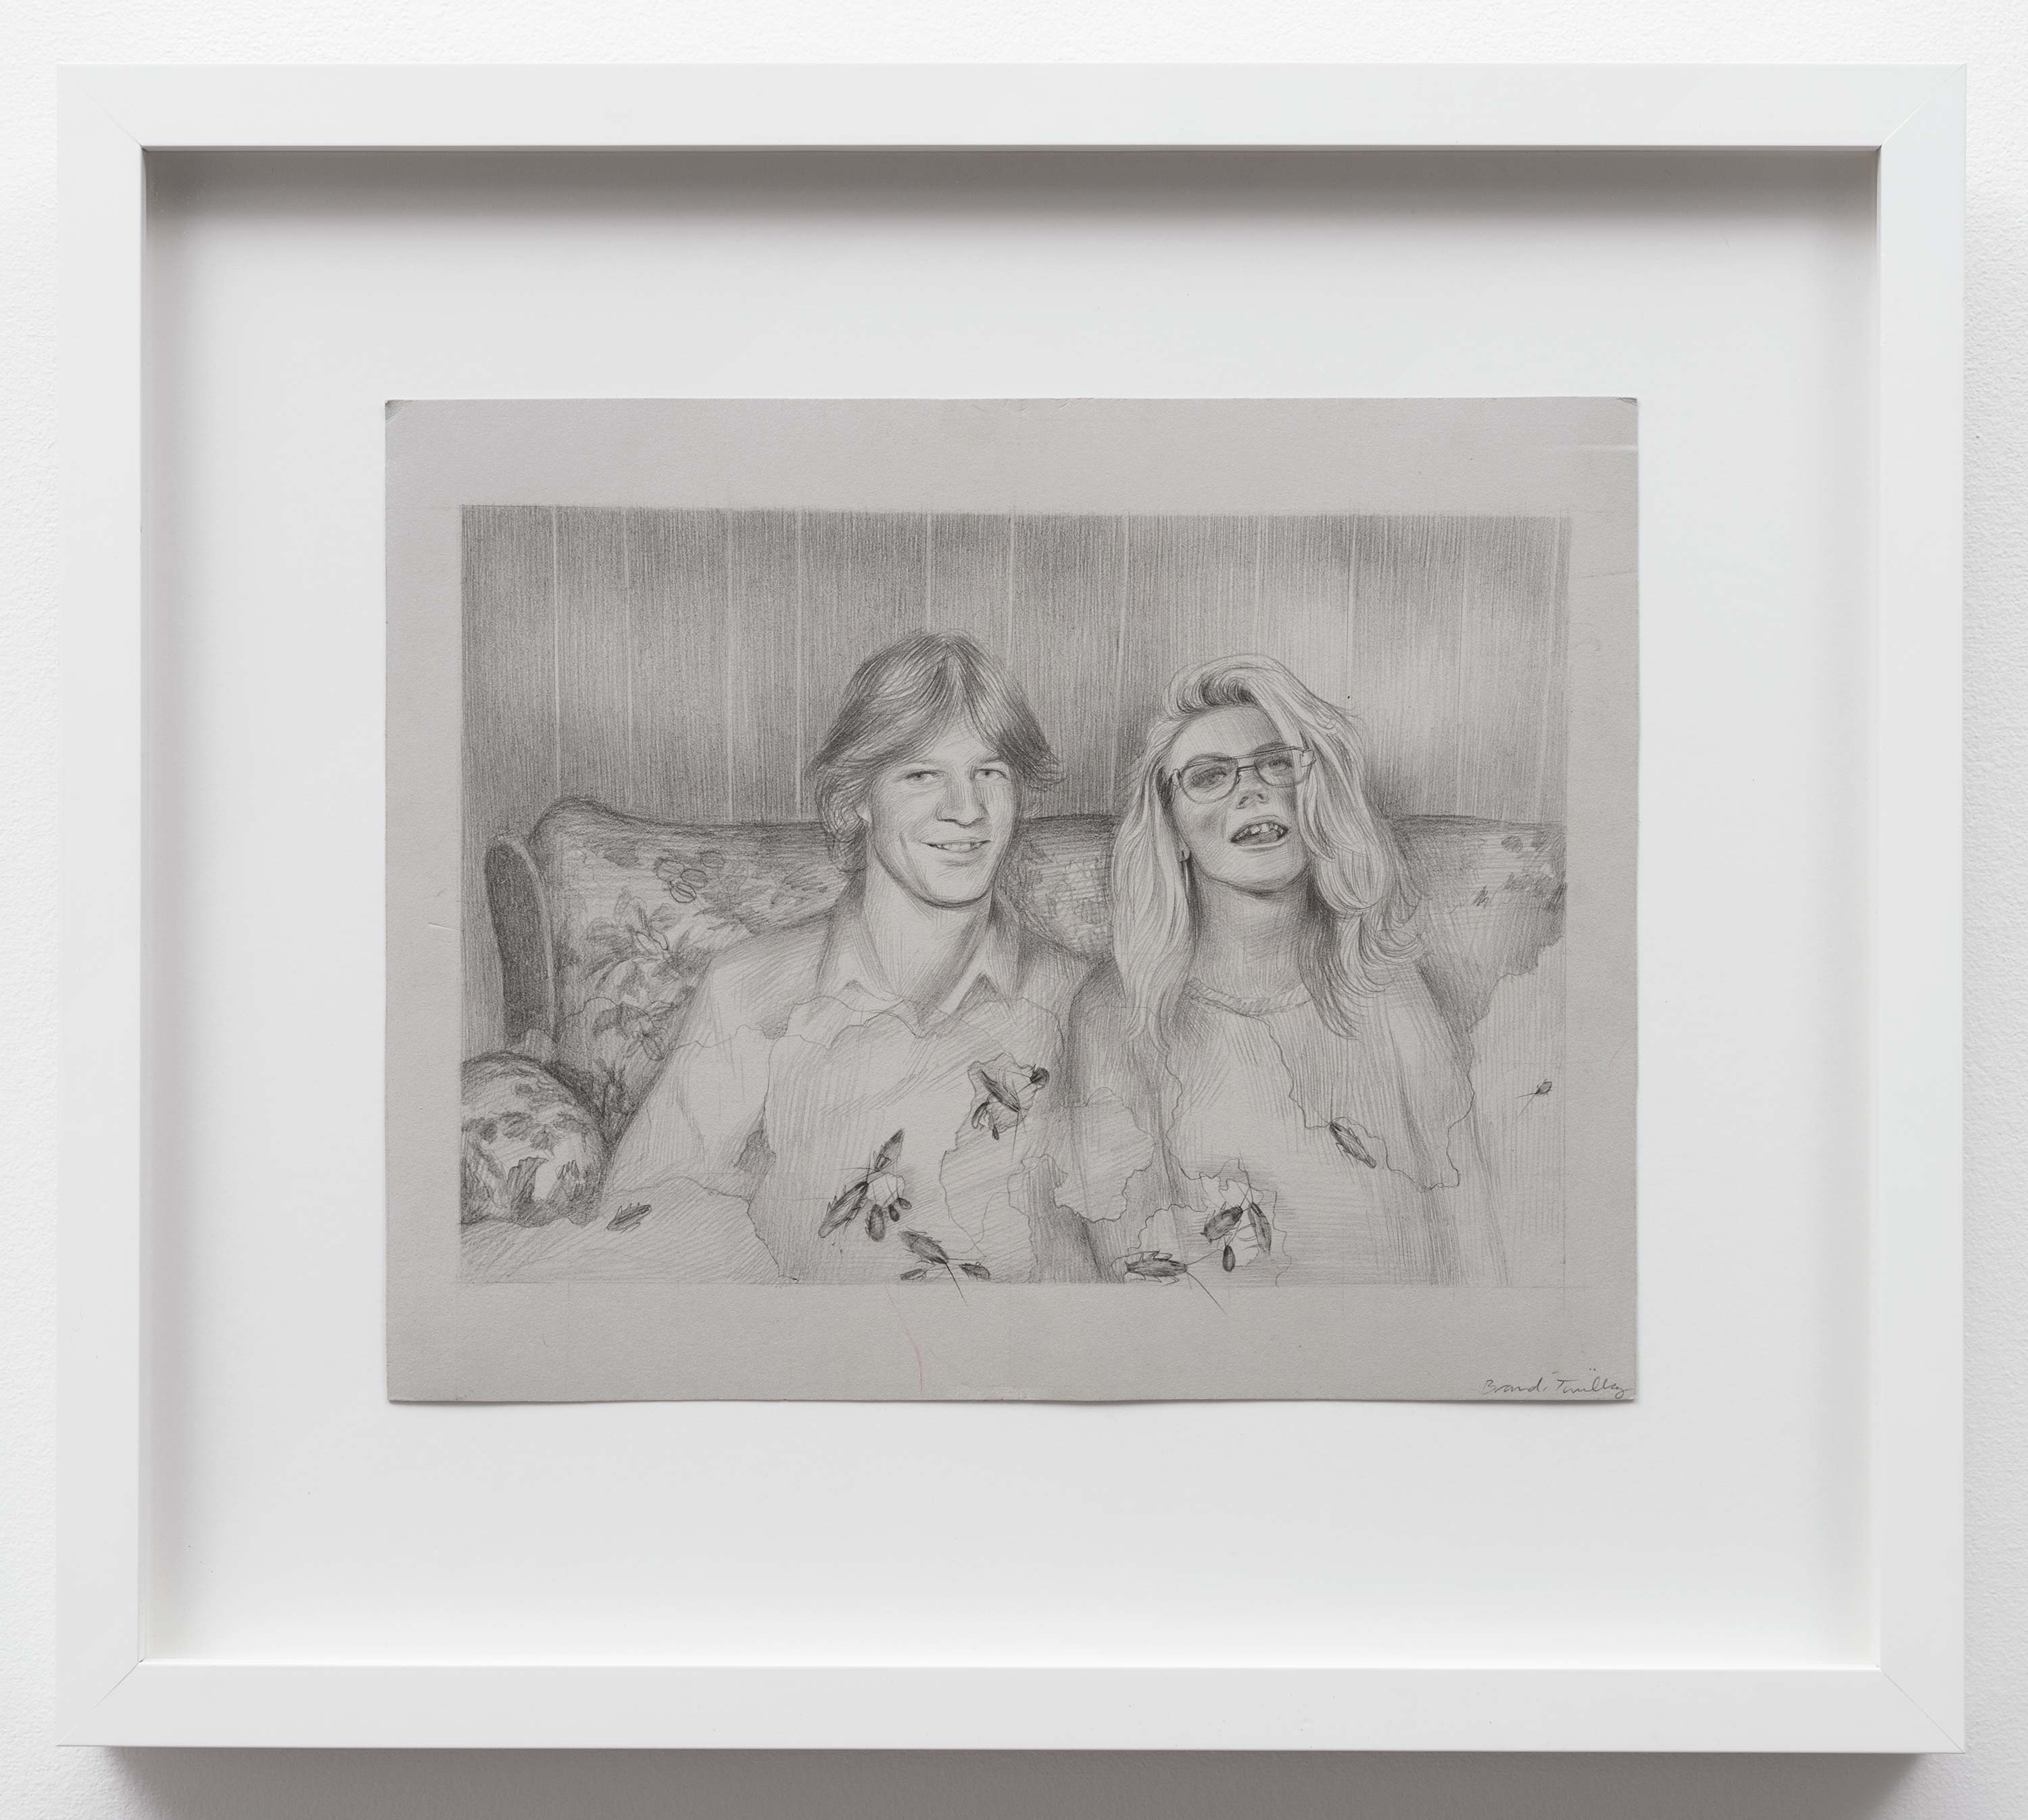 Brandi Twilley<br>On the Couch with Roaches<br>2015<br>Graphite on gray paper<br>9 x 11.5 inches (23 x 29 cm)